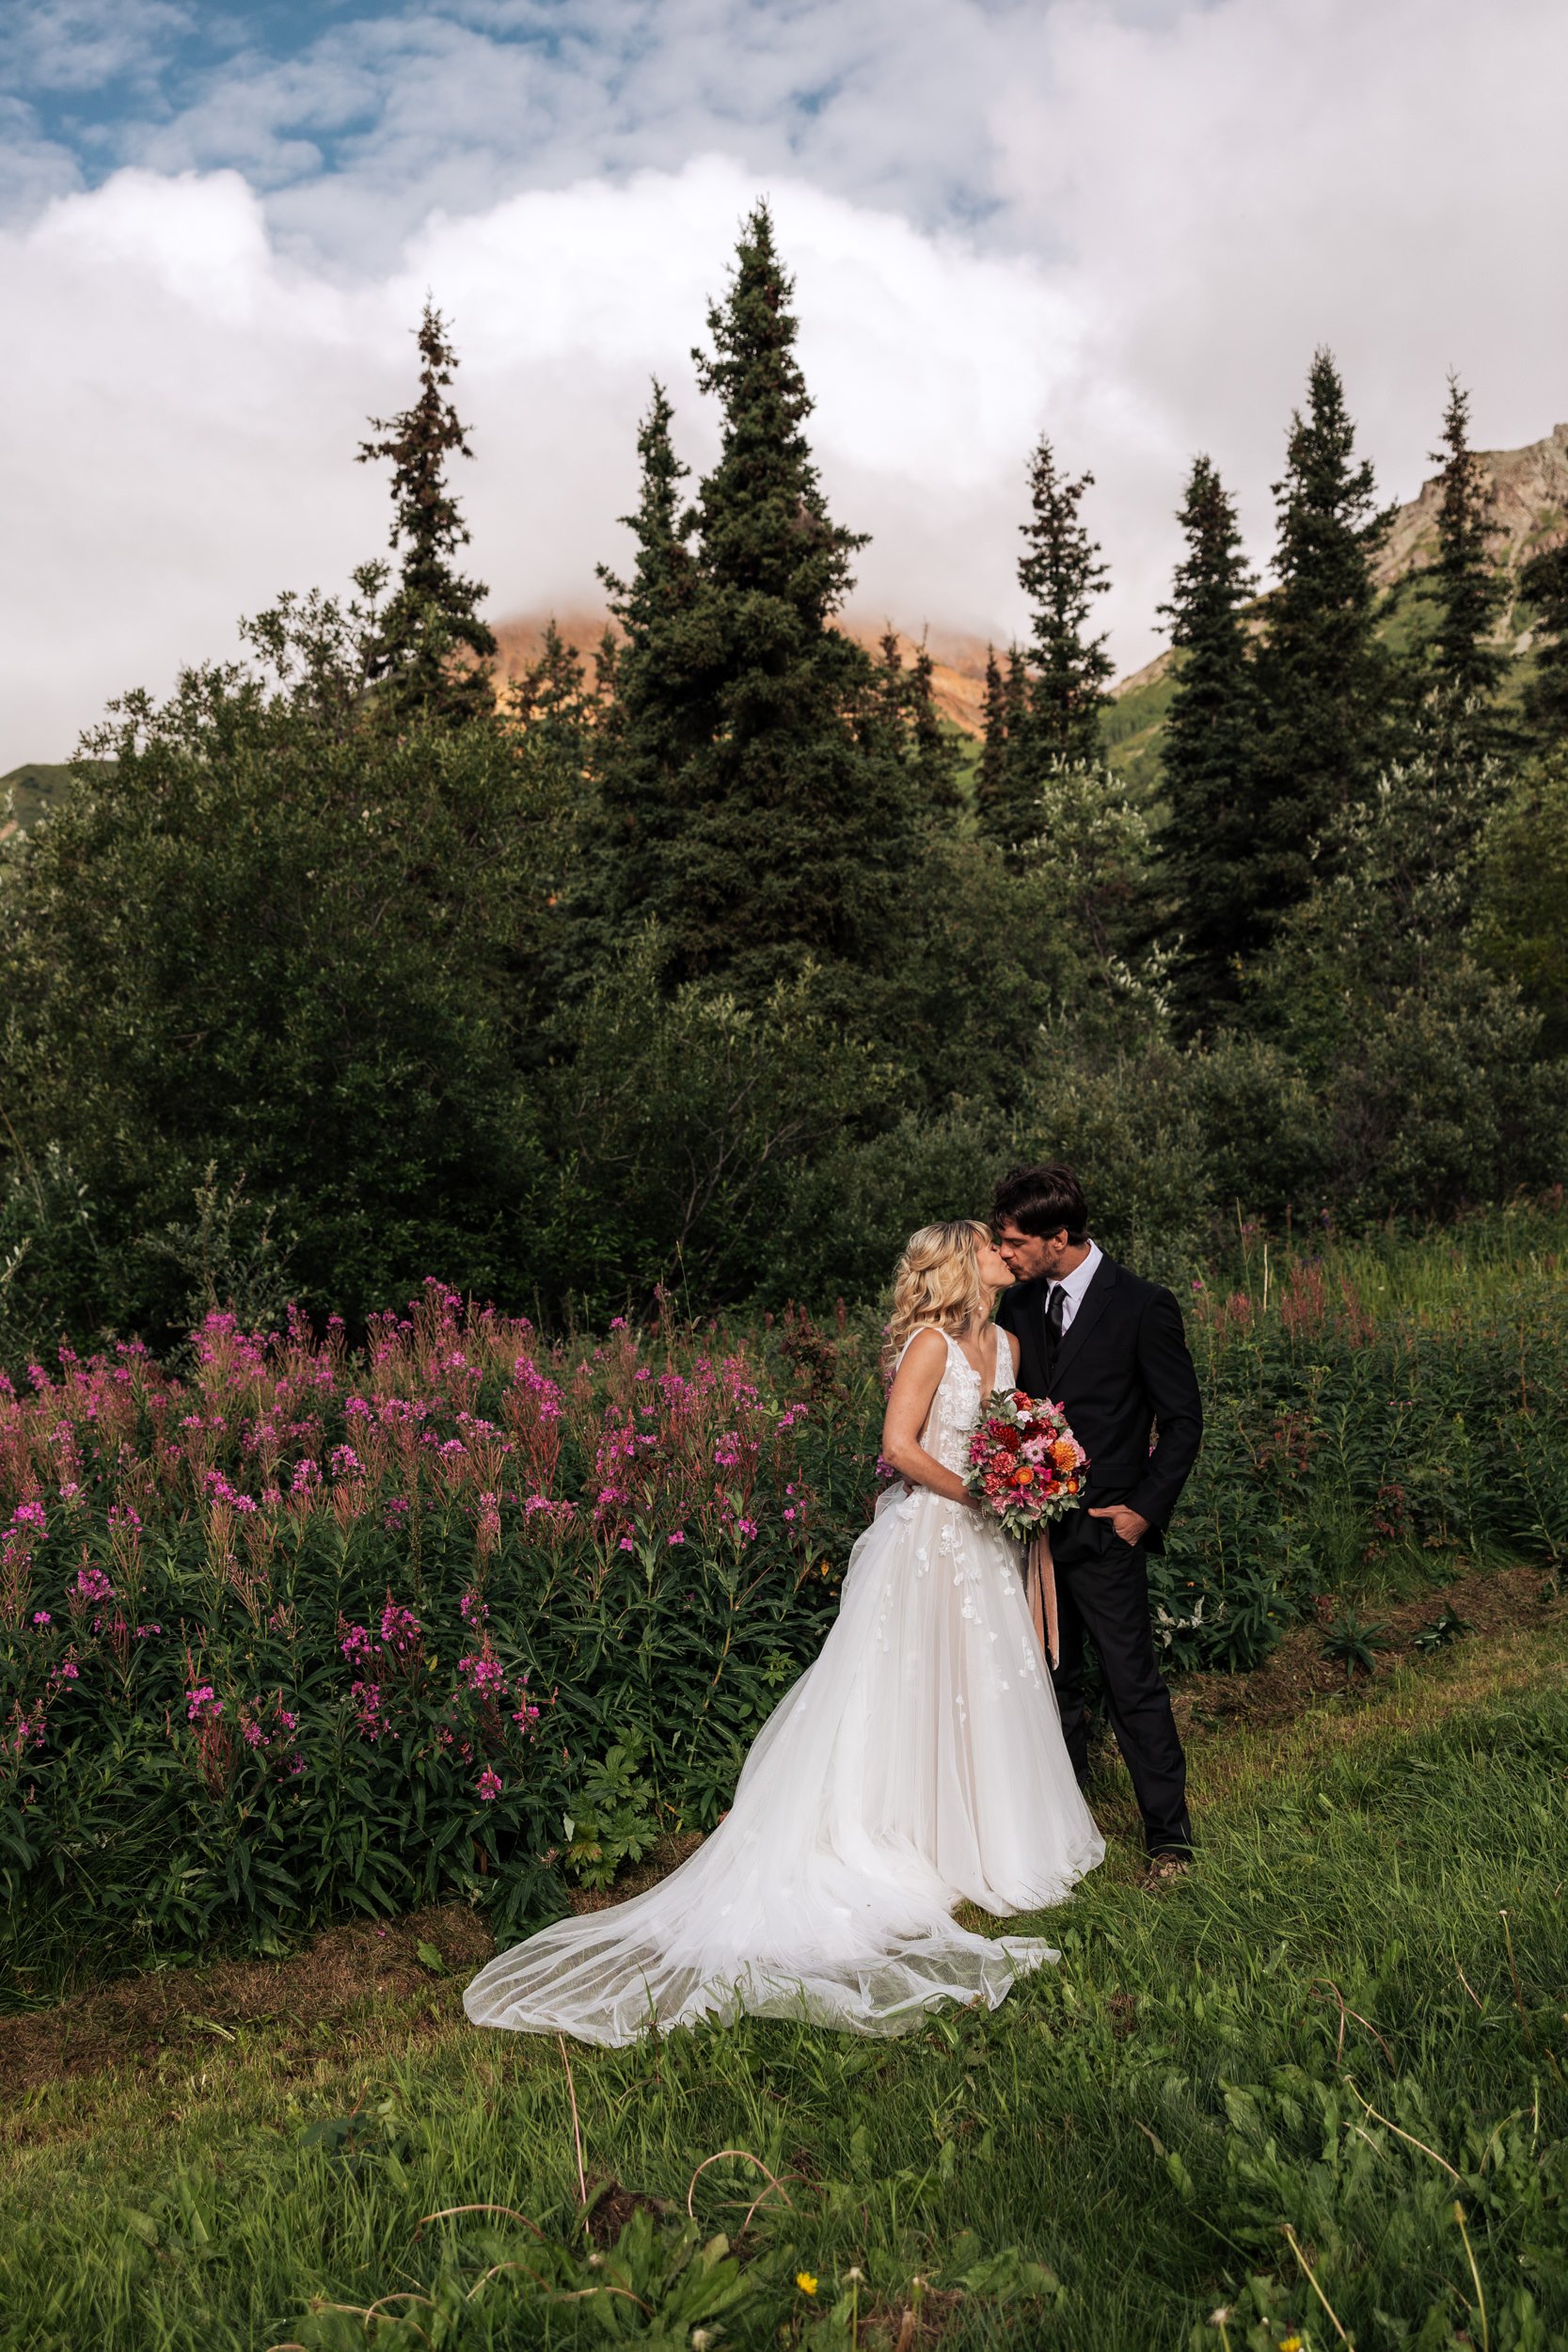 Intimate Family Elopement at Sheep Mountain Lodge in Alaska